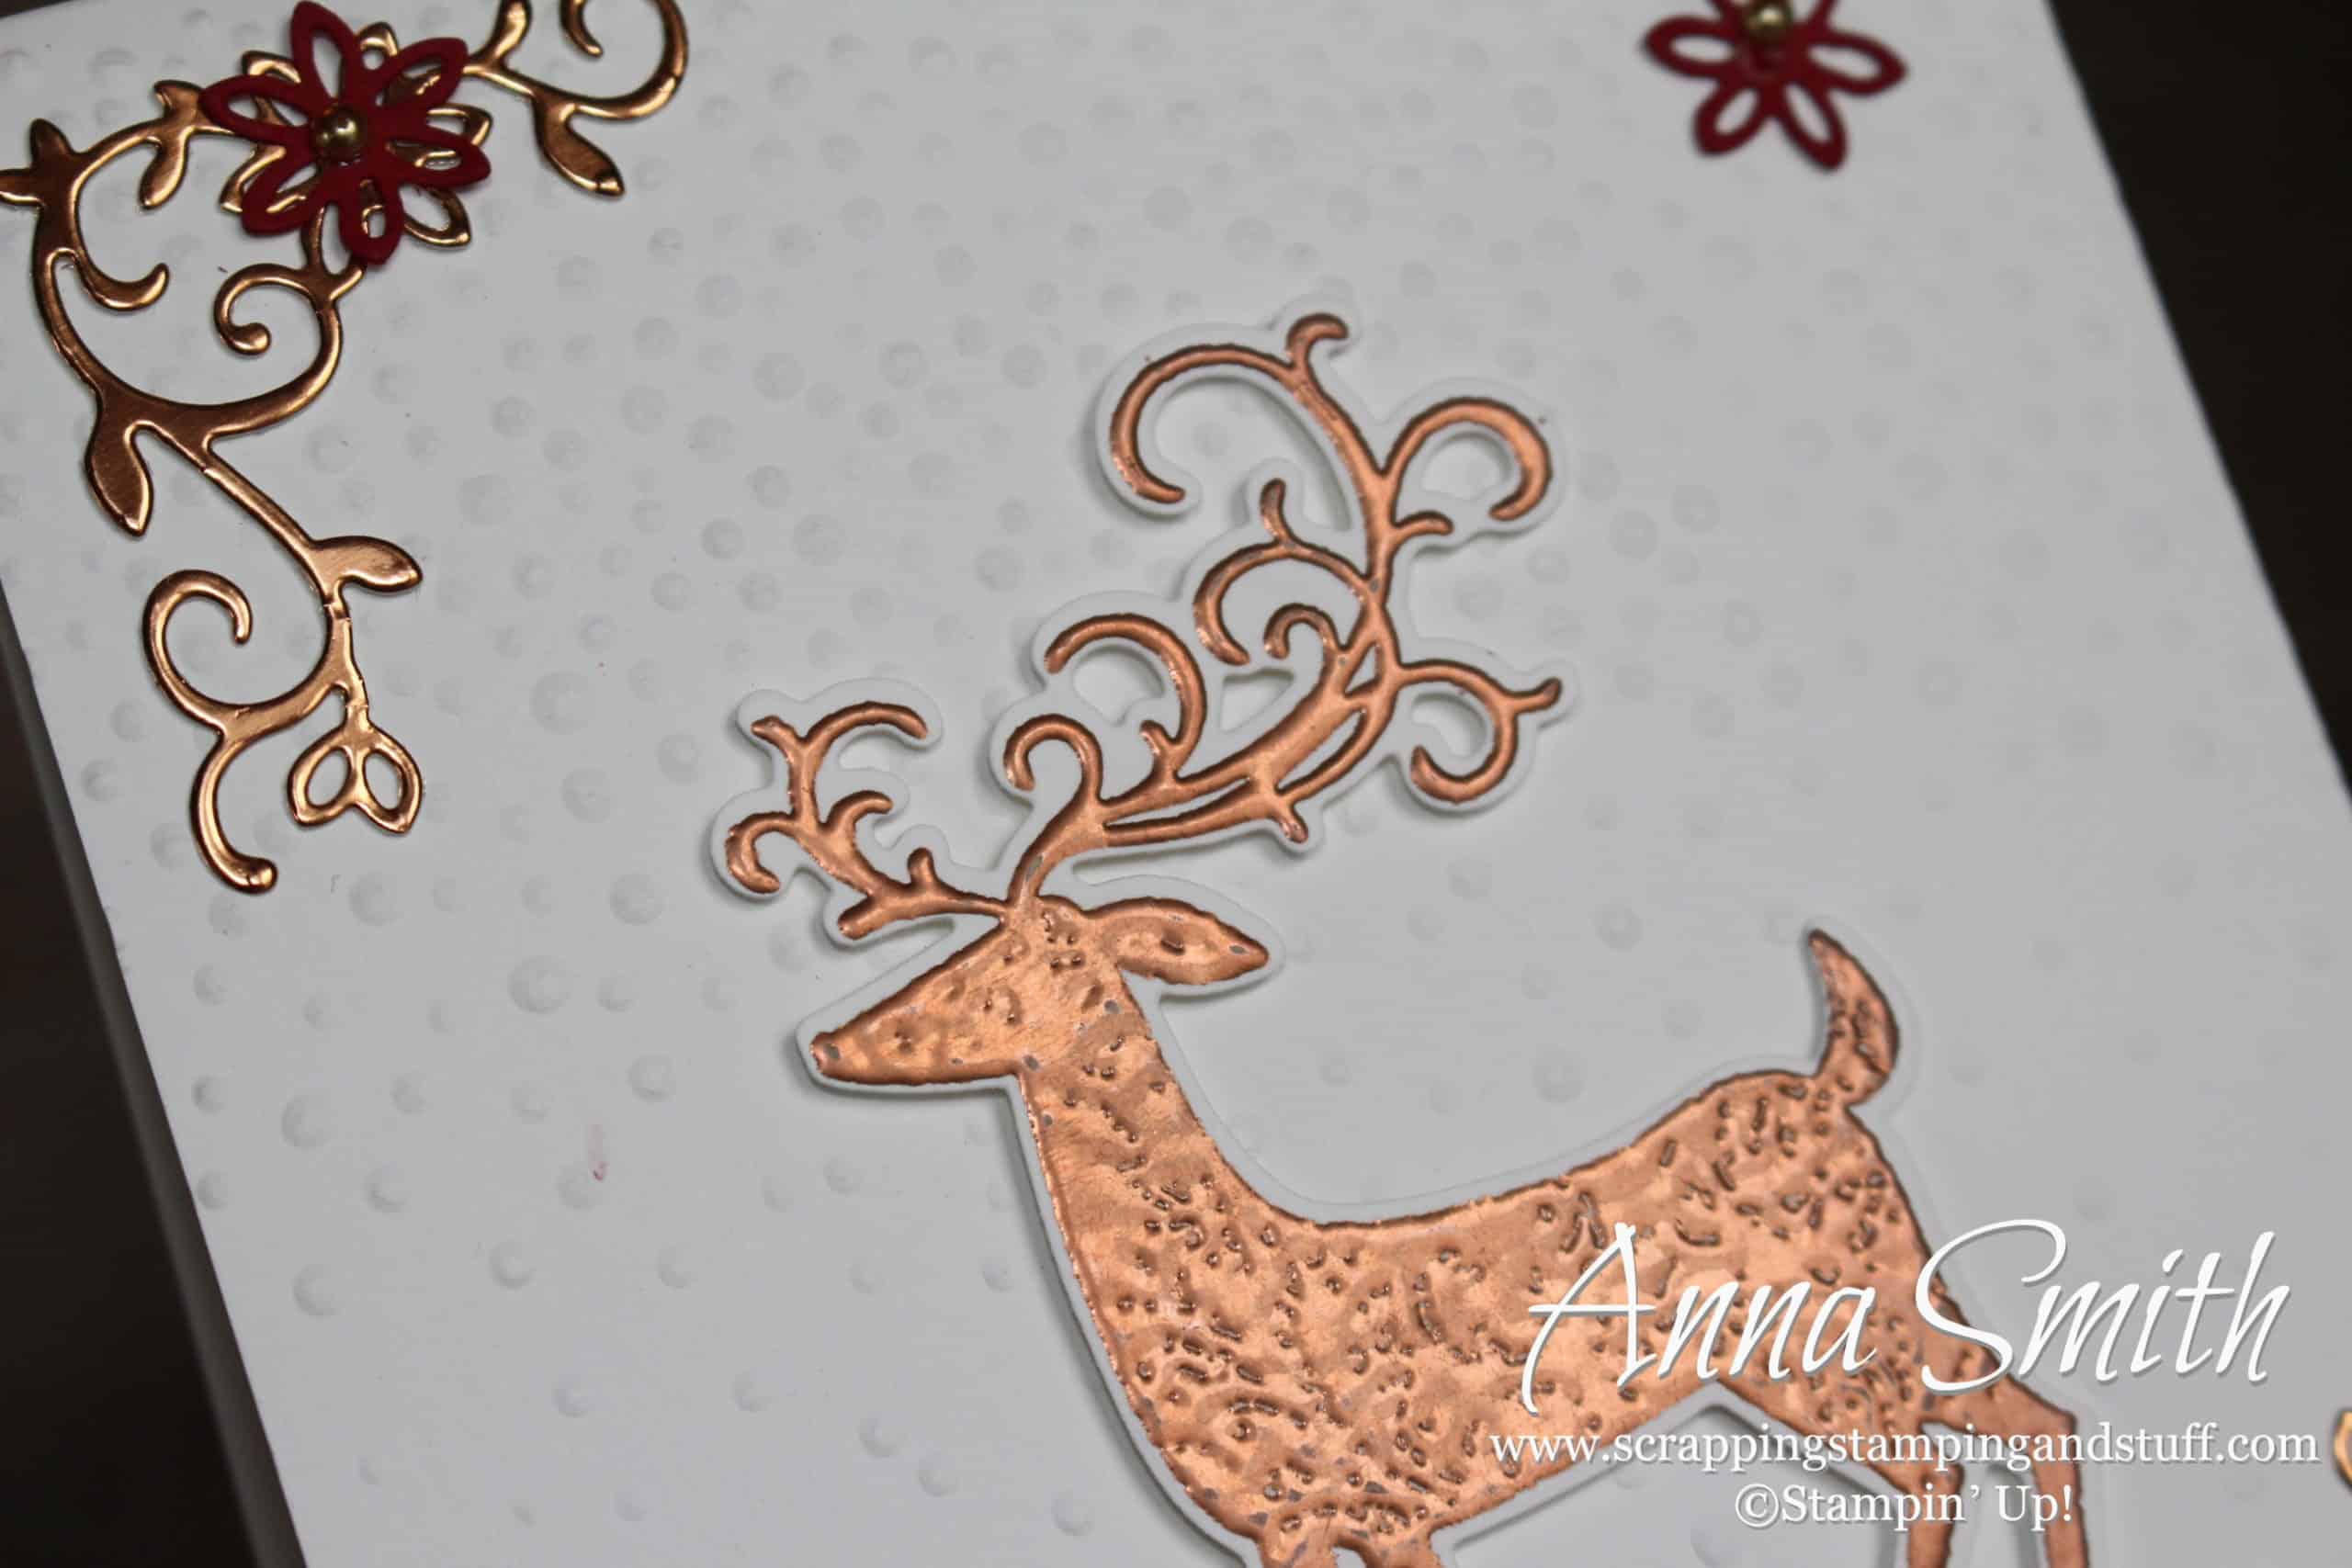 Beautiful Christmas card idea made with the Stampin' Up! Dashing Deer stamp set and Detailed Deer Thinlits.